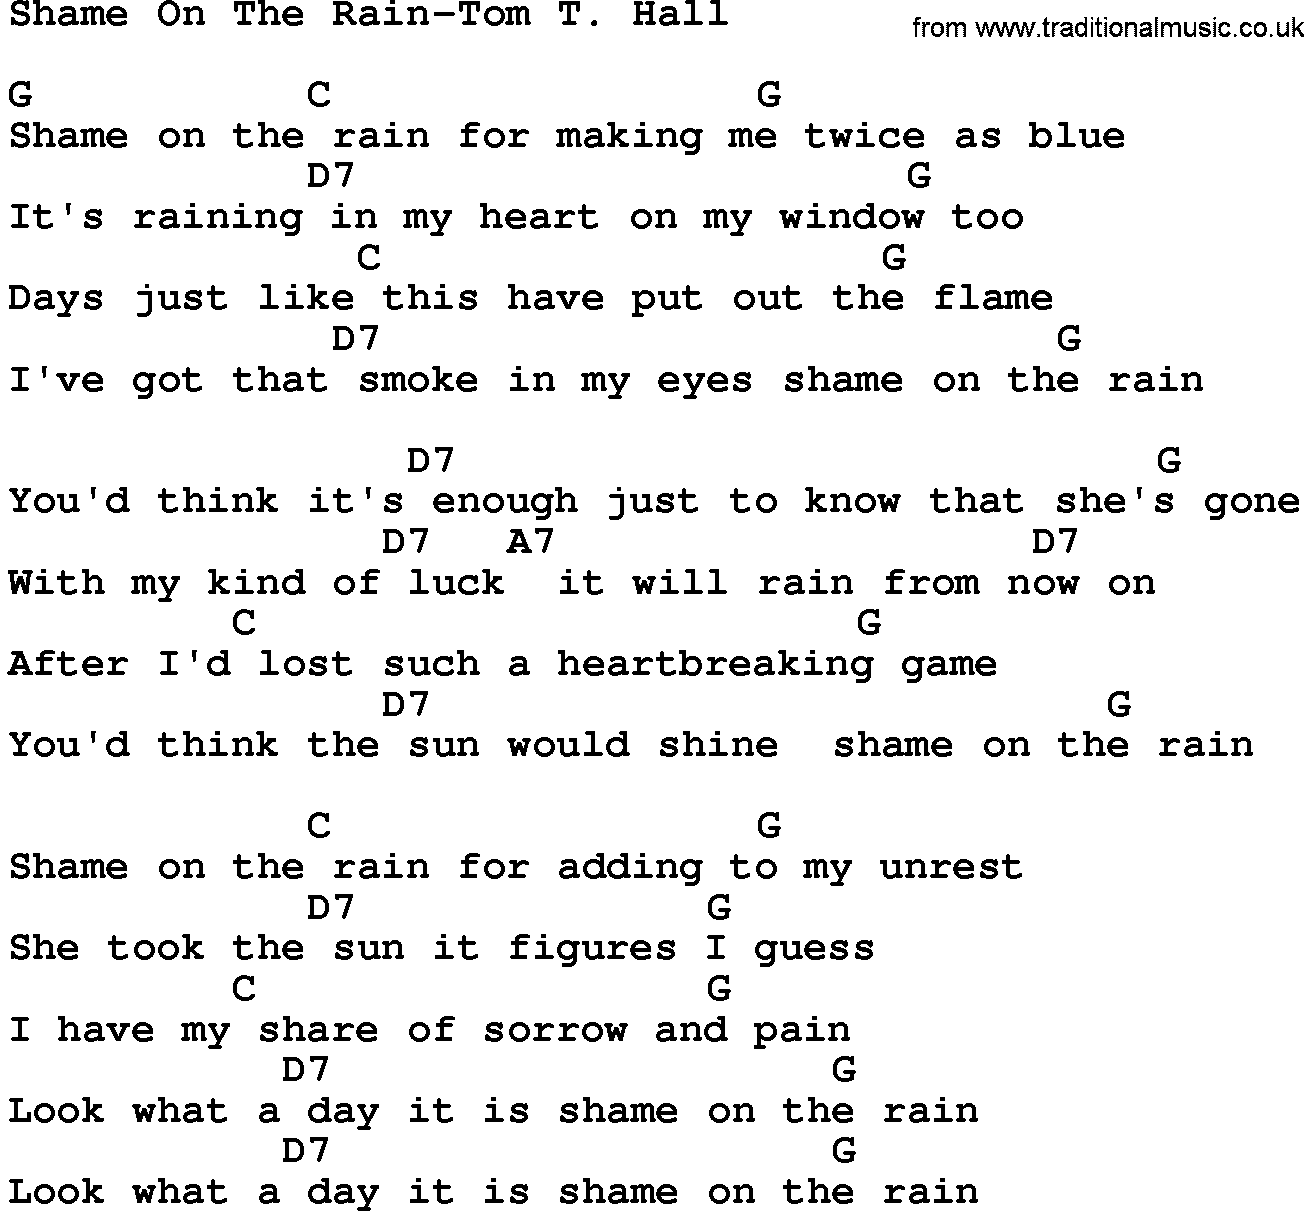 Country music song: Shame On The Rain-Tom T Hall lyrics and chords